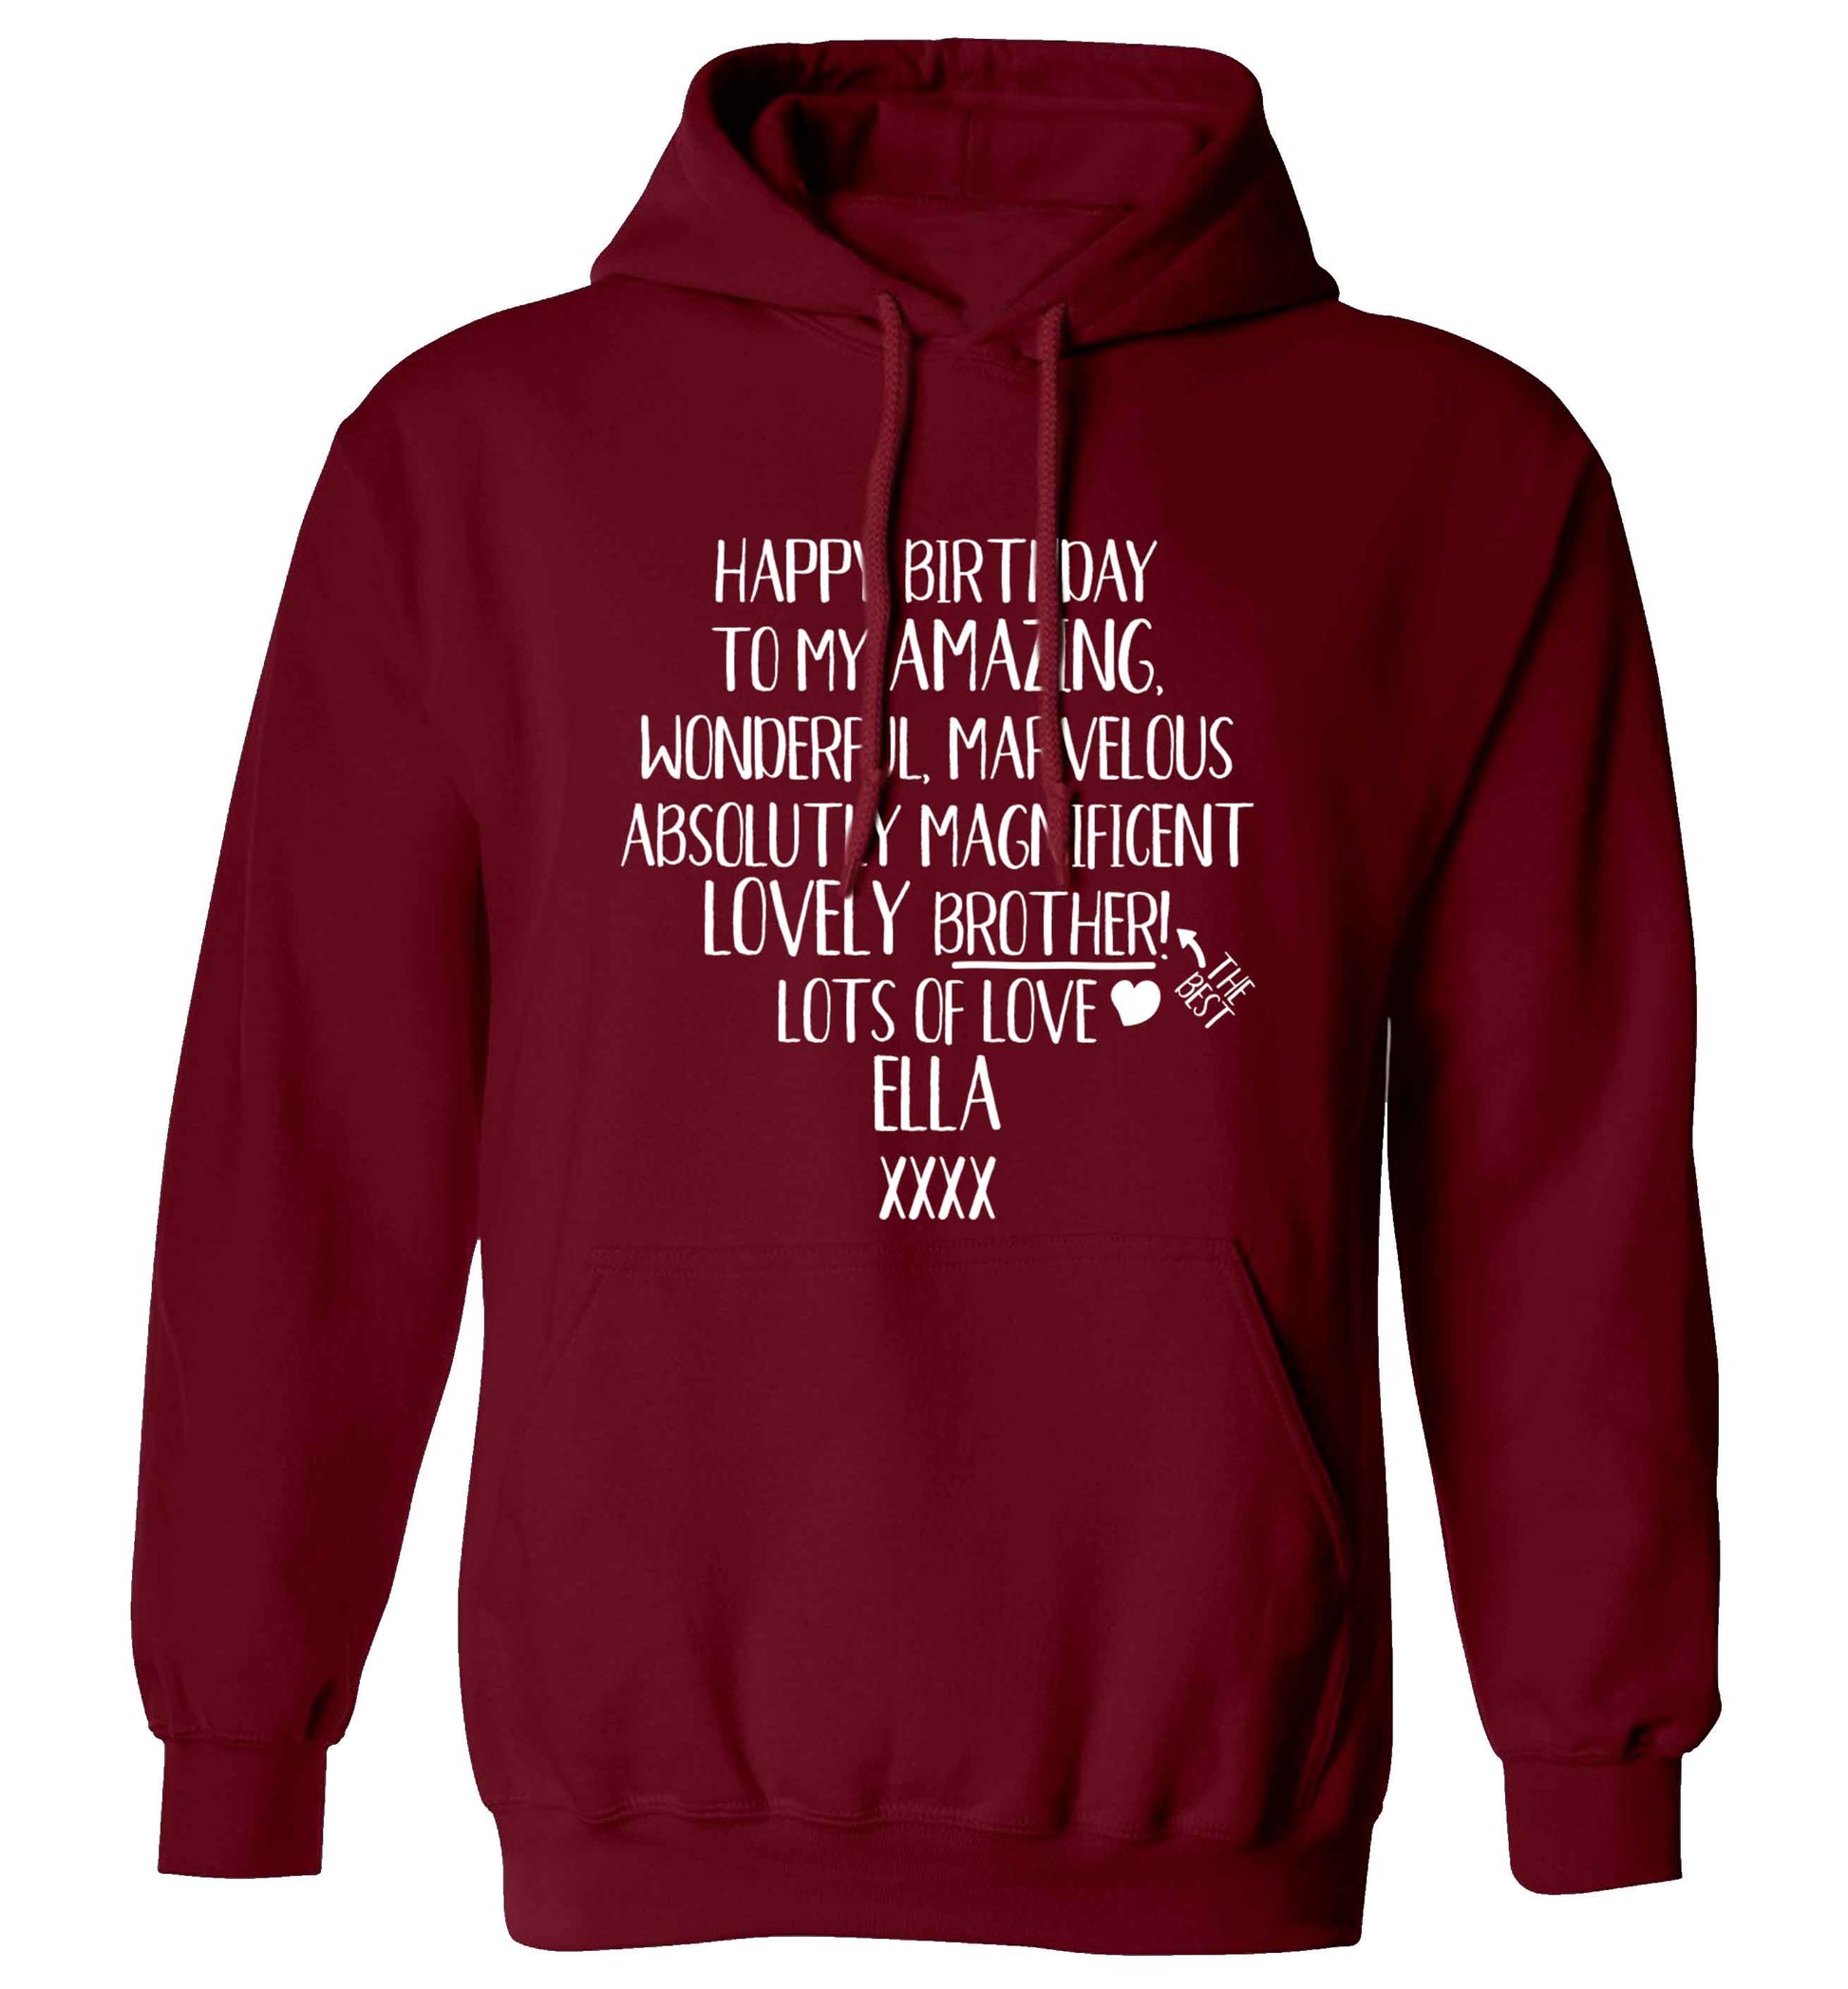 Personalised happy birthday to my amazing, wonderful, lovely brother adults unisex maroon hoodie 2XL